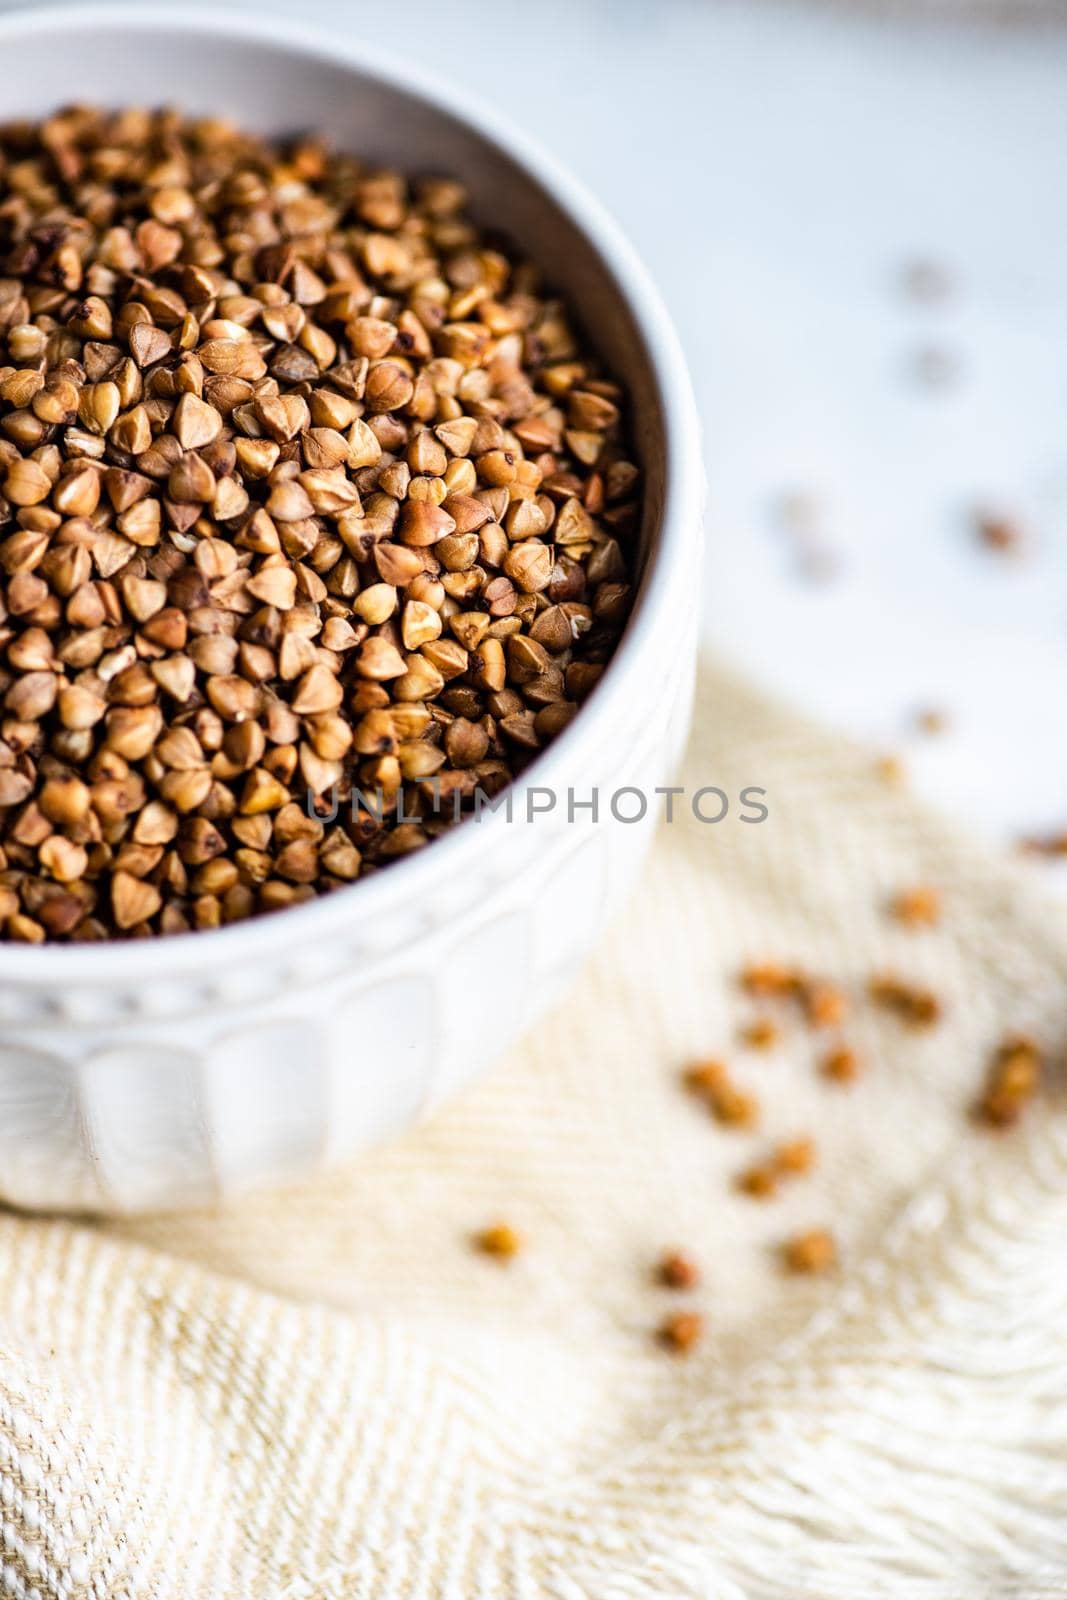 Healthy food concept with buckwheat by Elet